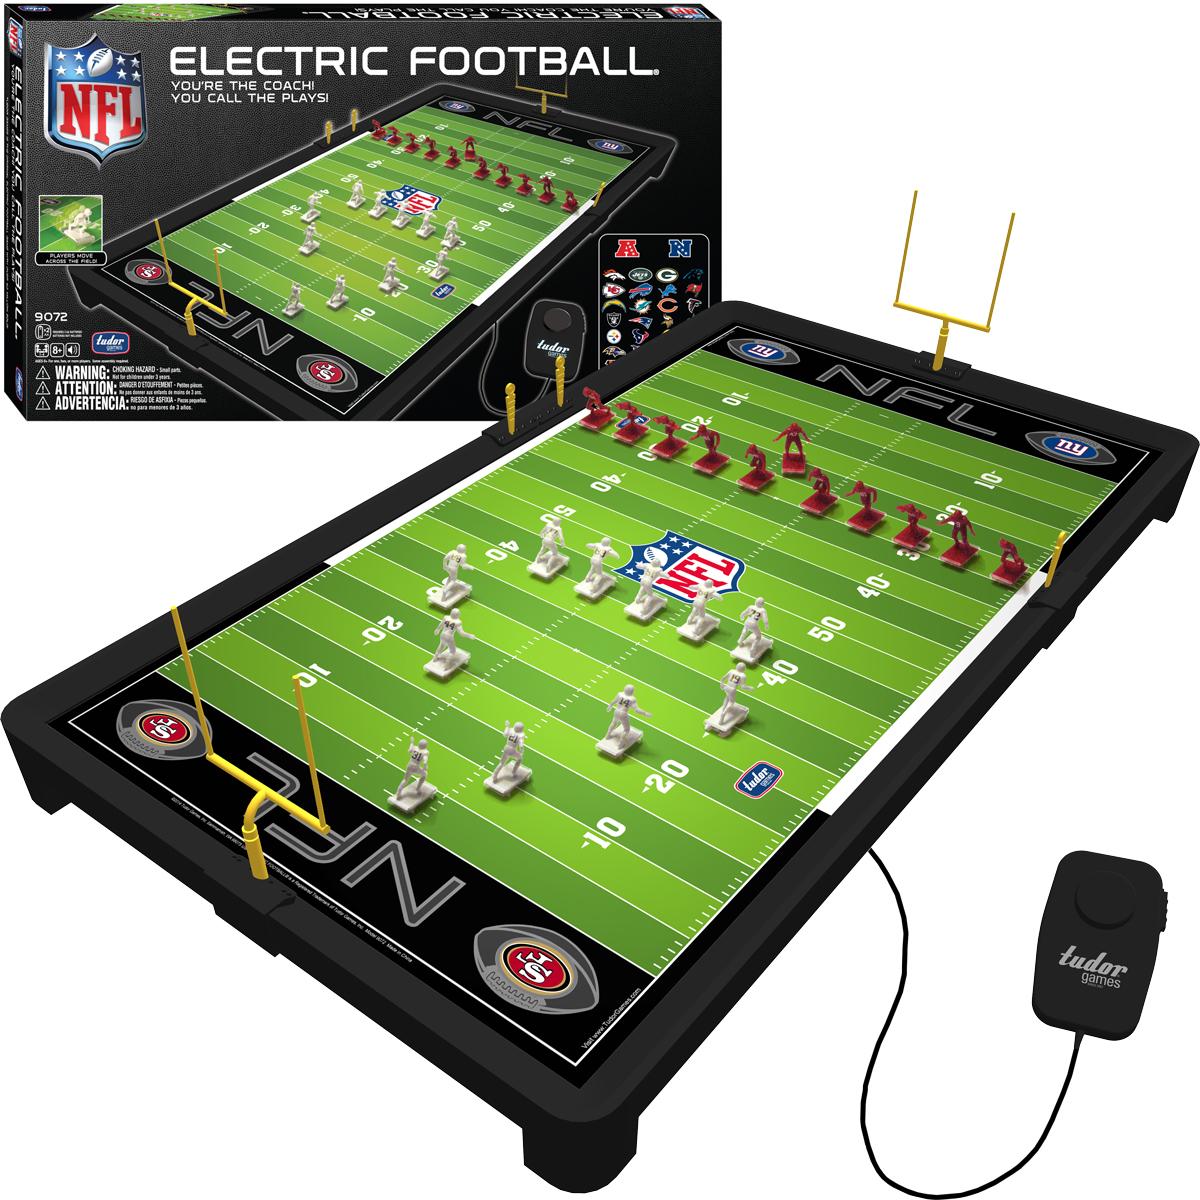 NFL electric football game